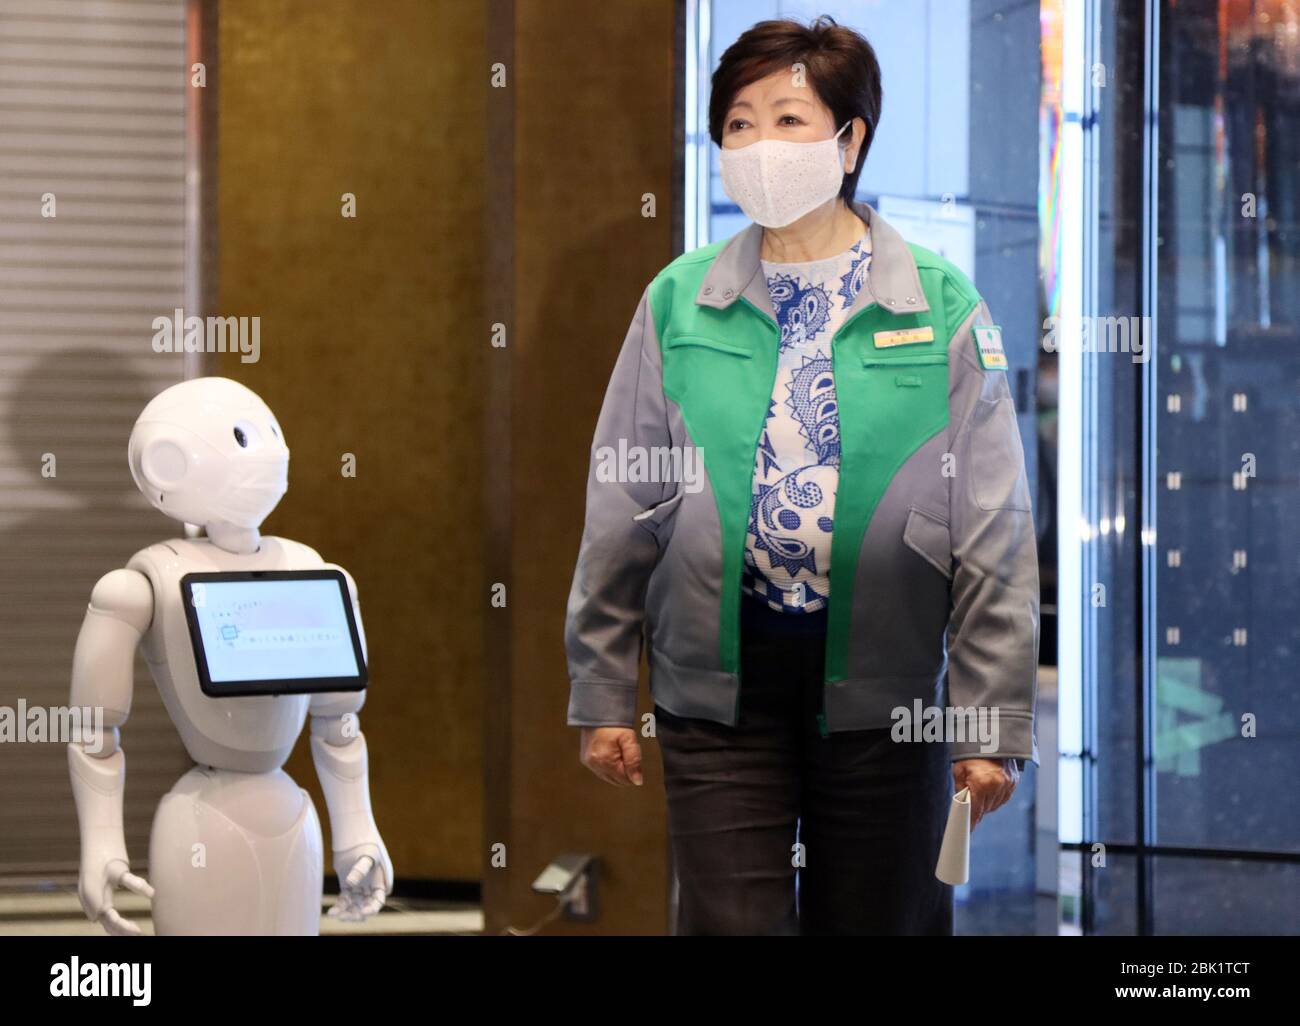 Tokyo, Japan. 1st May, 2020. Tokyo Governor Yuriko Koike is greeted by a humanoid robot Pepper as she inspects the new accomodations for the patients of the new coronavirus with mild symptons as Tokyo Metropolitan Government hired a hotel in Tokyo on Friday, May 1, 2020. Tokyo Metropolitan Government opens an additional medical lodging facilities for the new coronavirus patients while Softbank's humanoid robot Pepper and cleaning robot Whiz will work to help caretakers at the facilities. Credit: Yoshio Tsunoda/AFLO/Alamy Live News Stock Photo